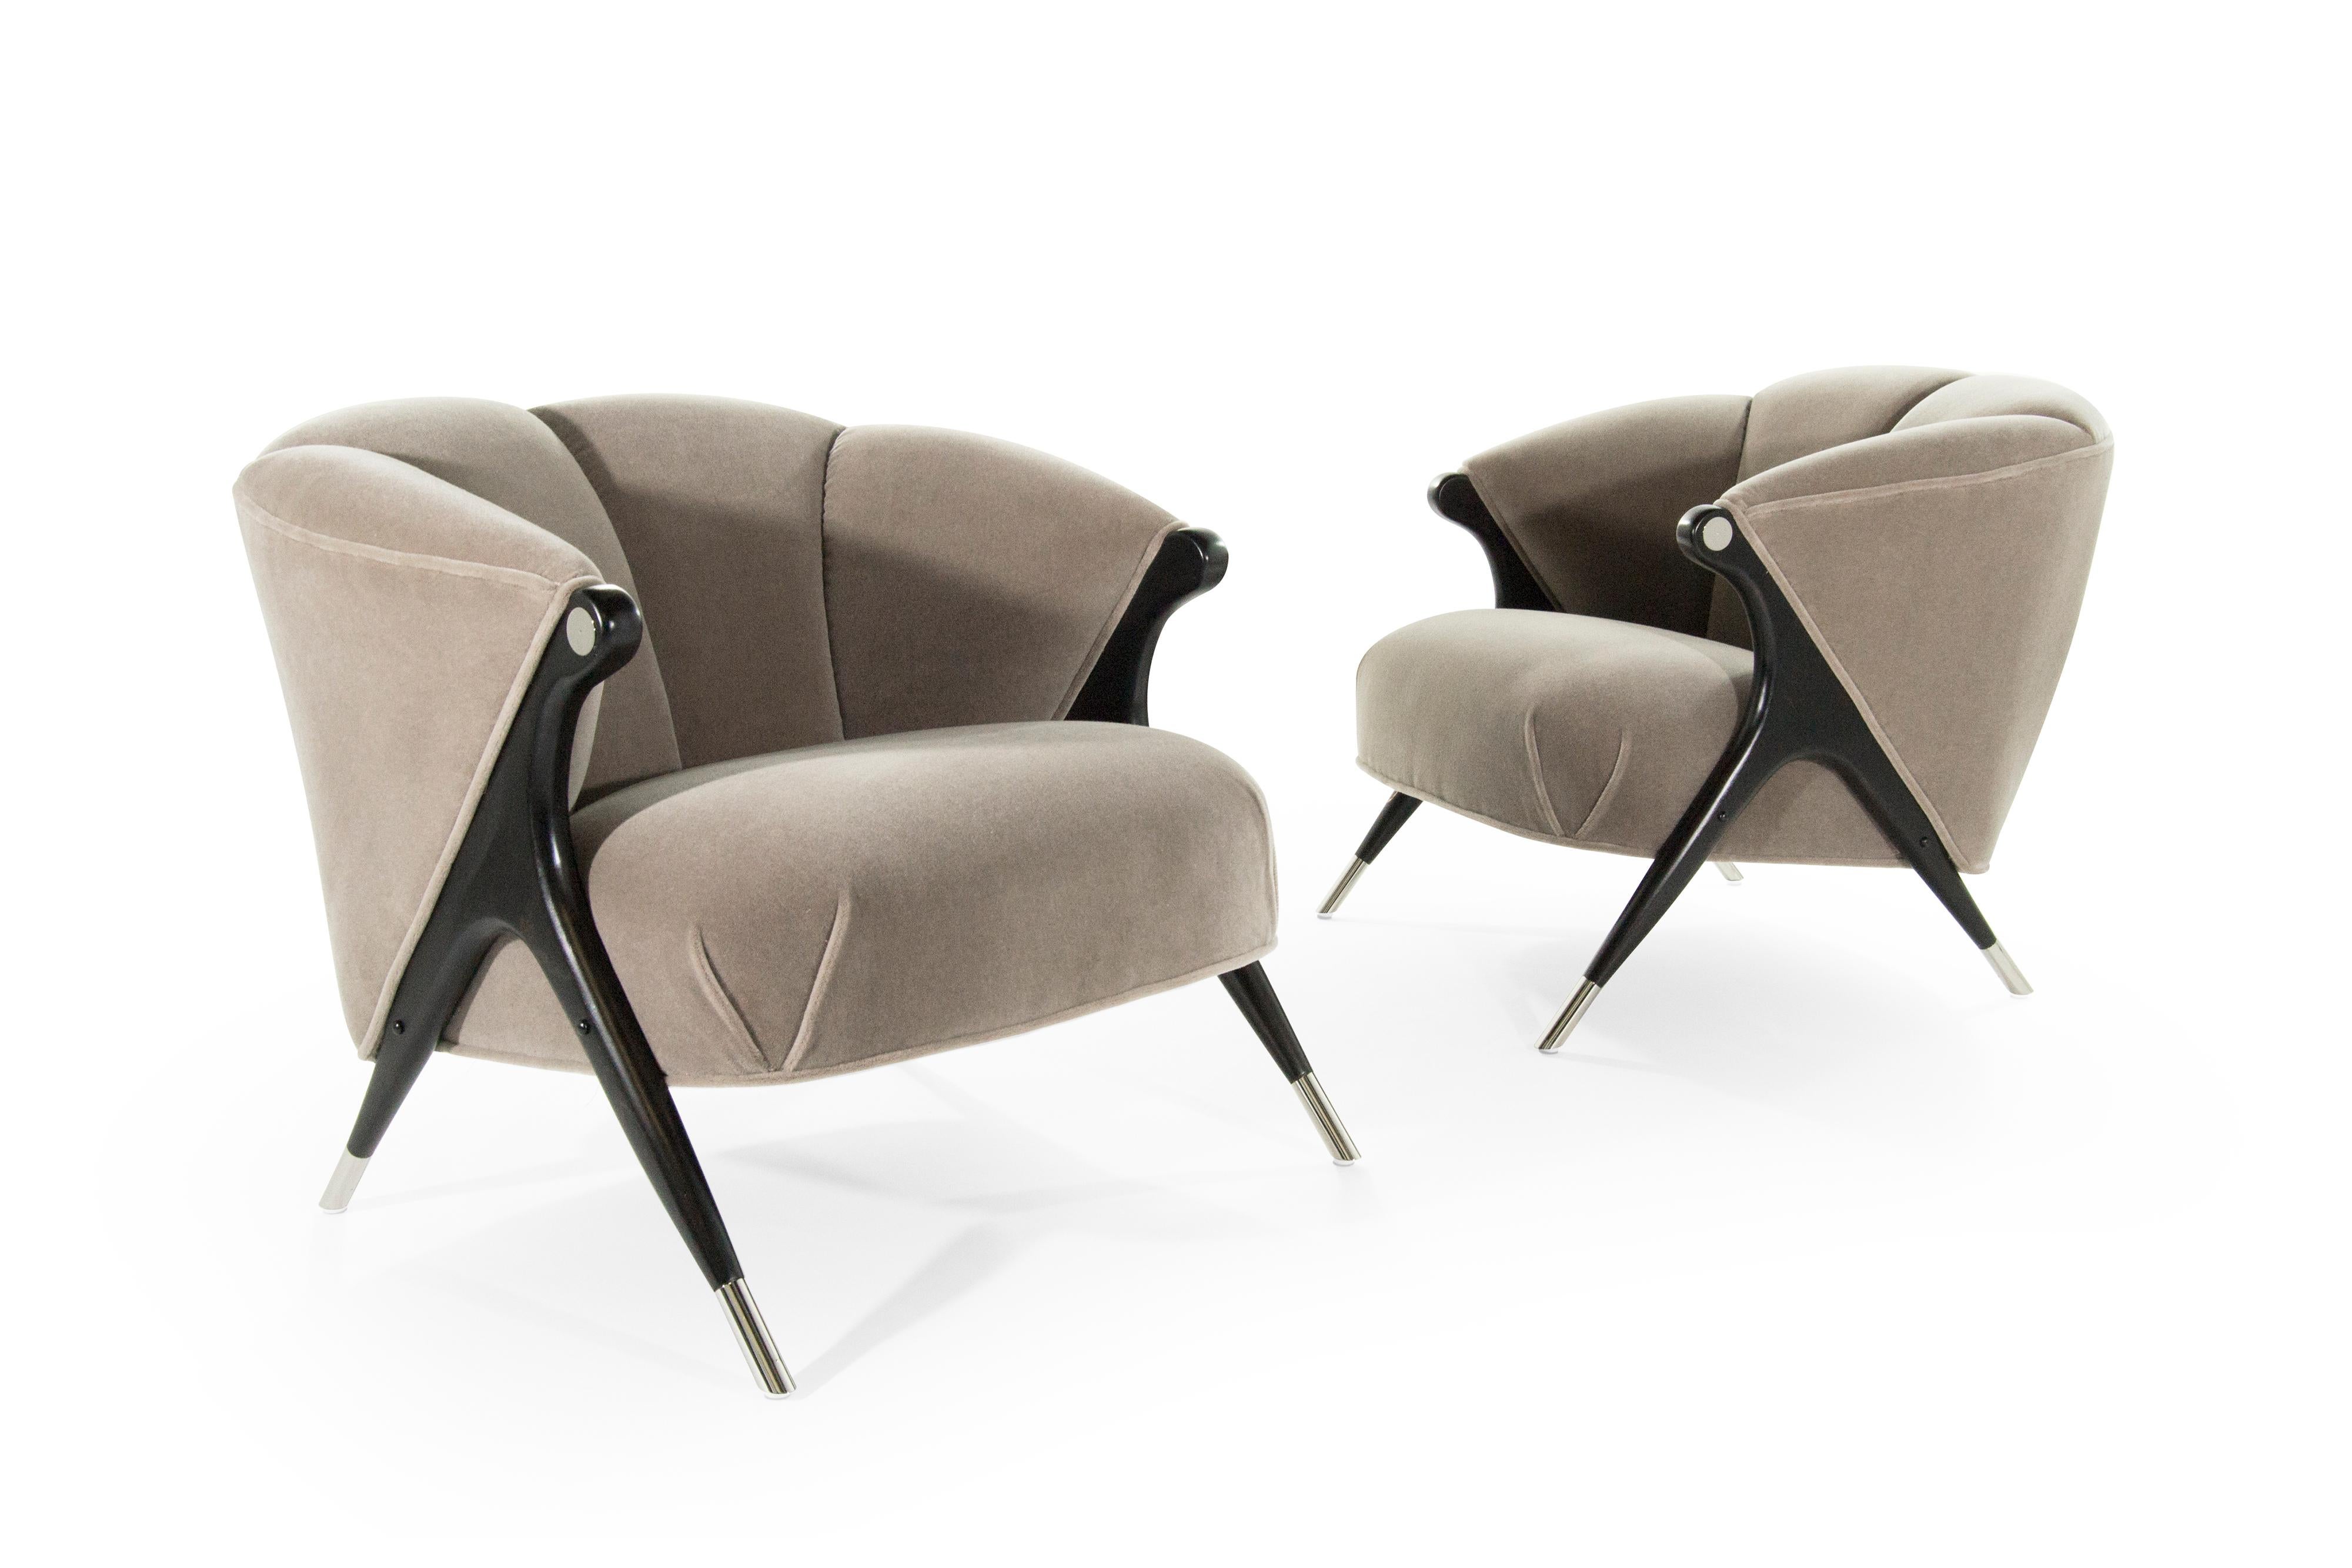 Brass Modernist Karpen Lounge Chairs in Taupe Mohair, 1950s